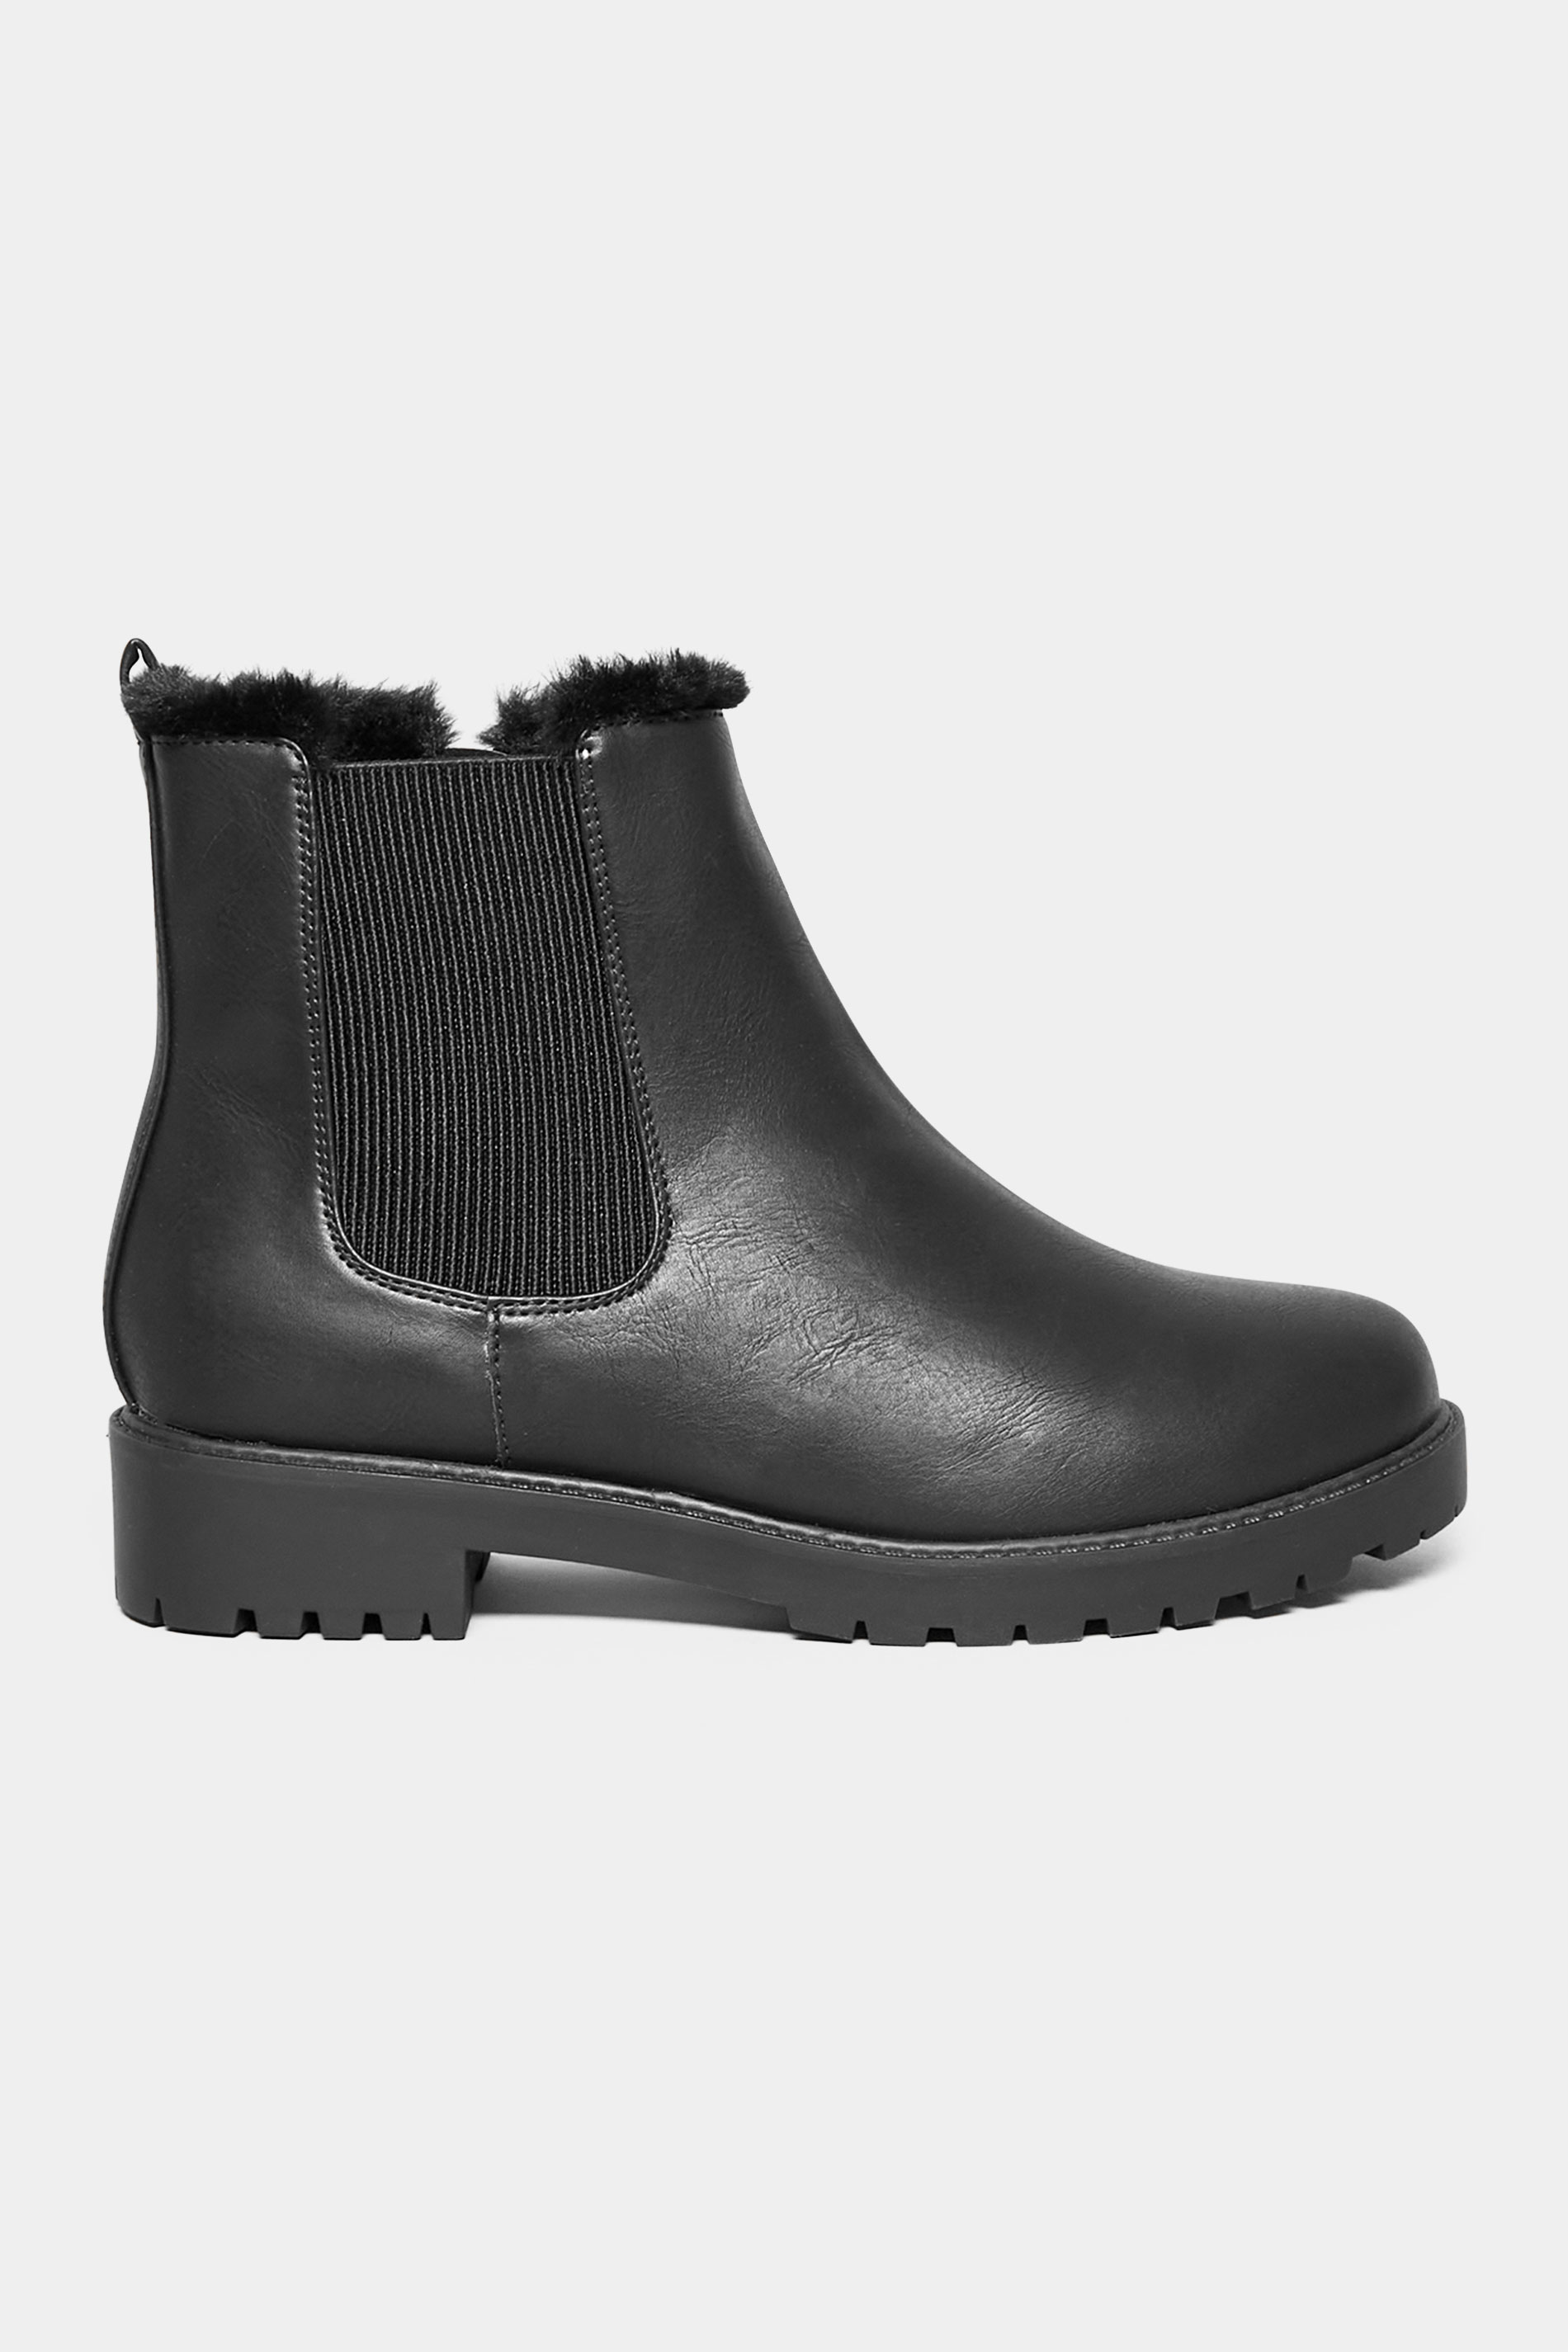 Black Faux Fur Lined Chelsea Boots In Wide E Fit & Extra Wide EEE Fit | Yours Clothing 3